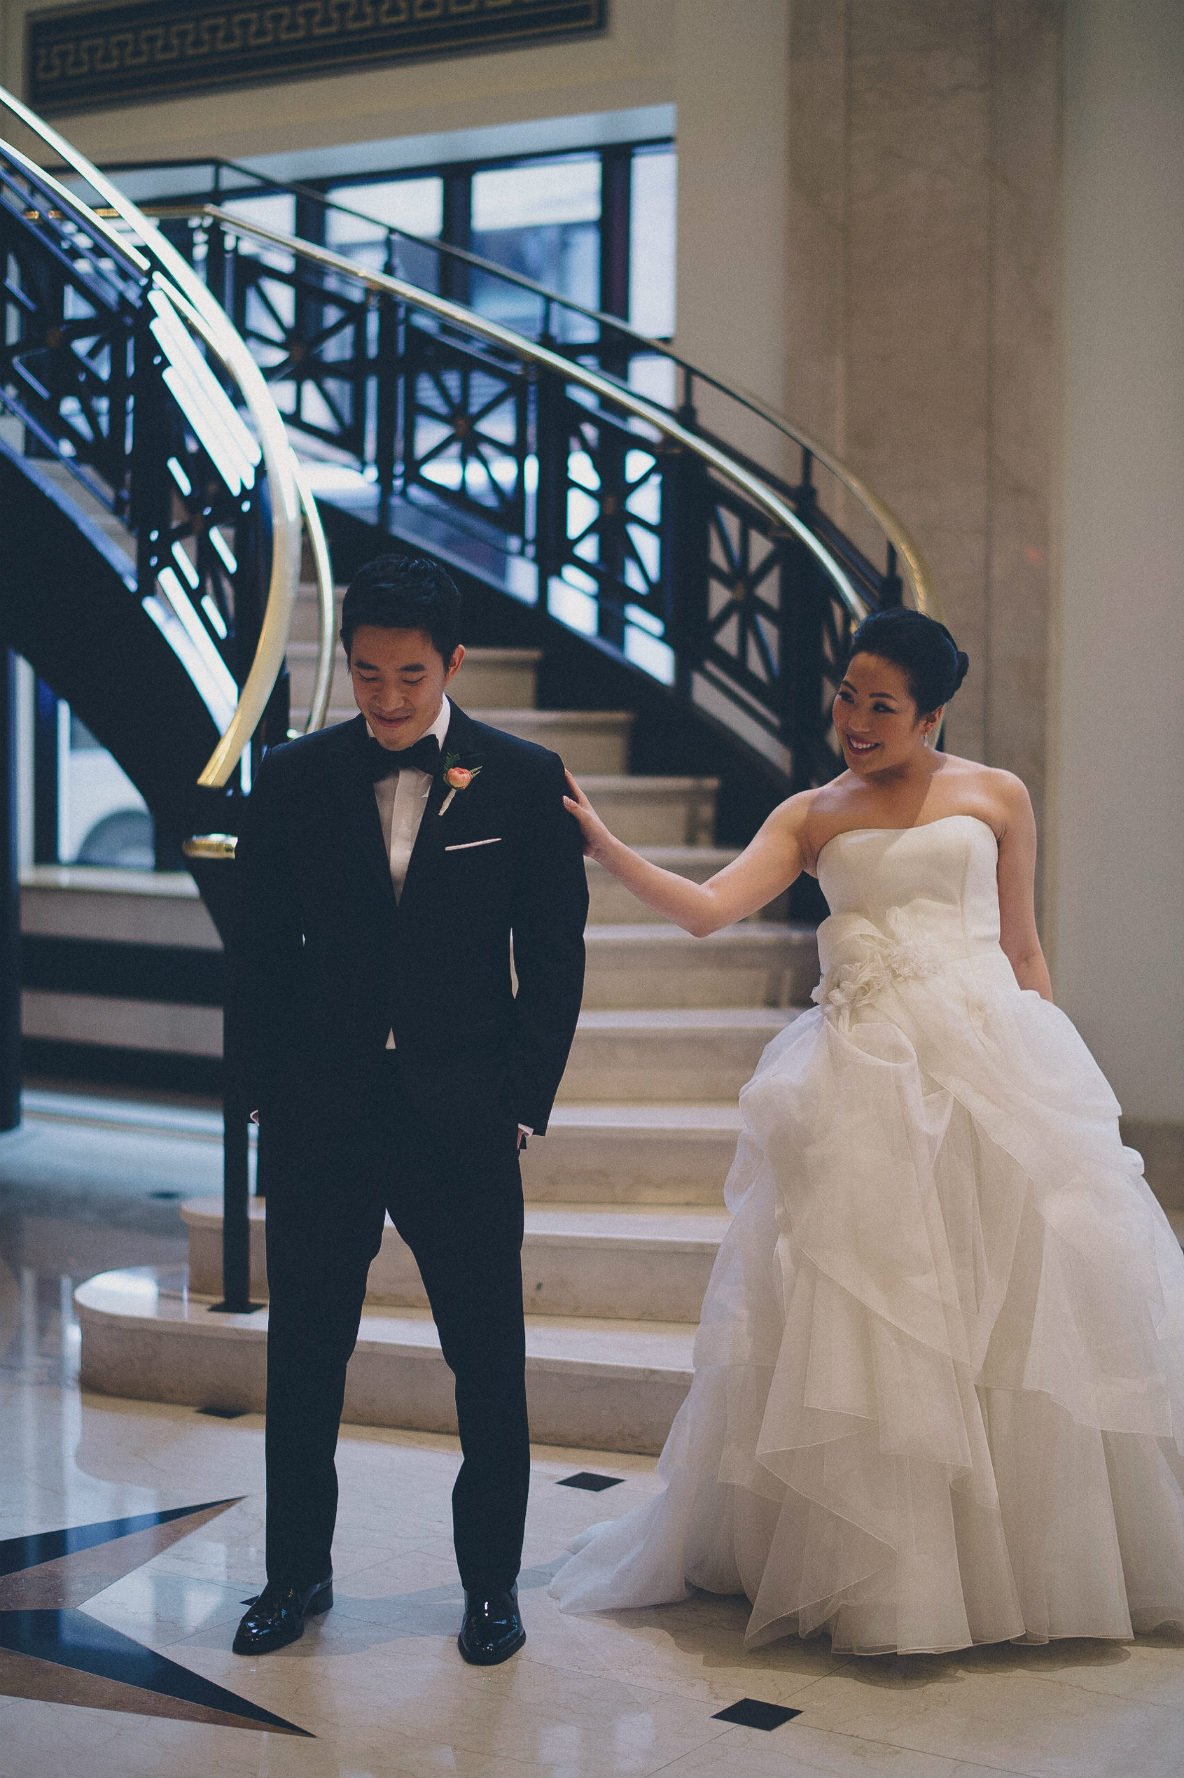 17.-Rookery-Wedding.-This-is-Feeling-Photography.-Sweetchic-Events.-First-Look.-JW-Marriott.-Grand-Staircase.jpg